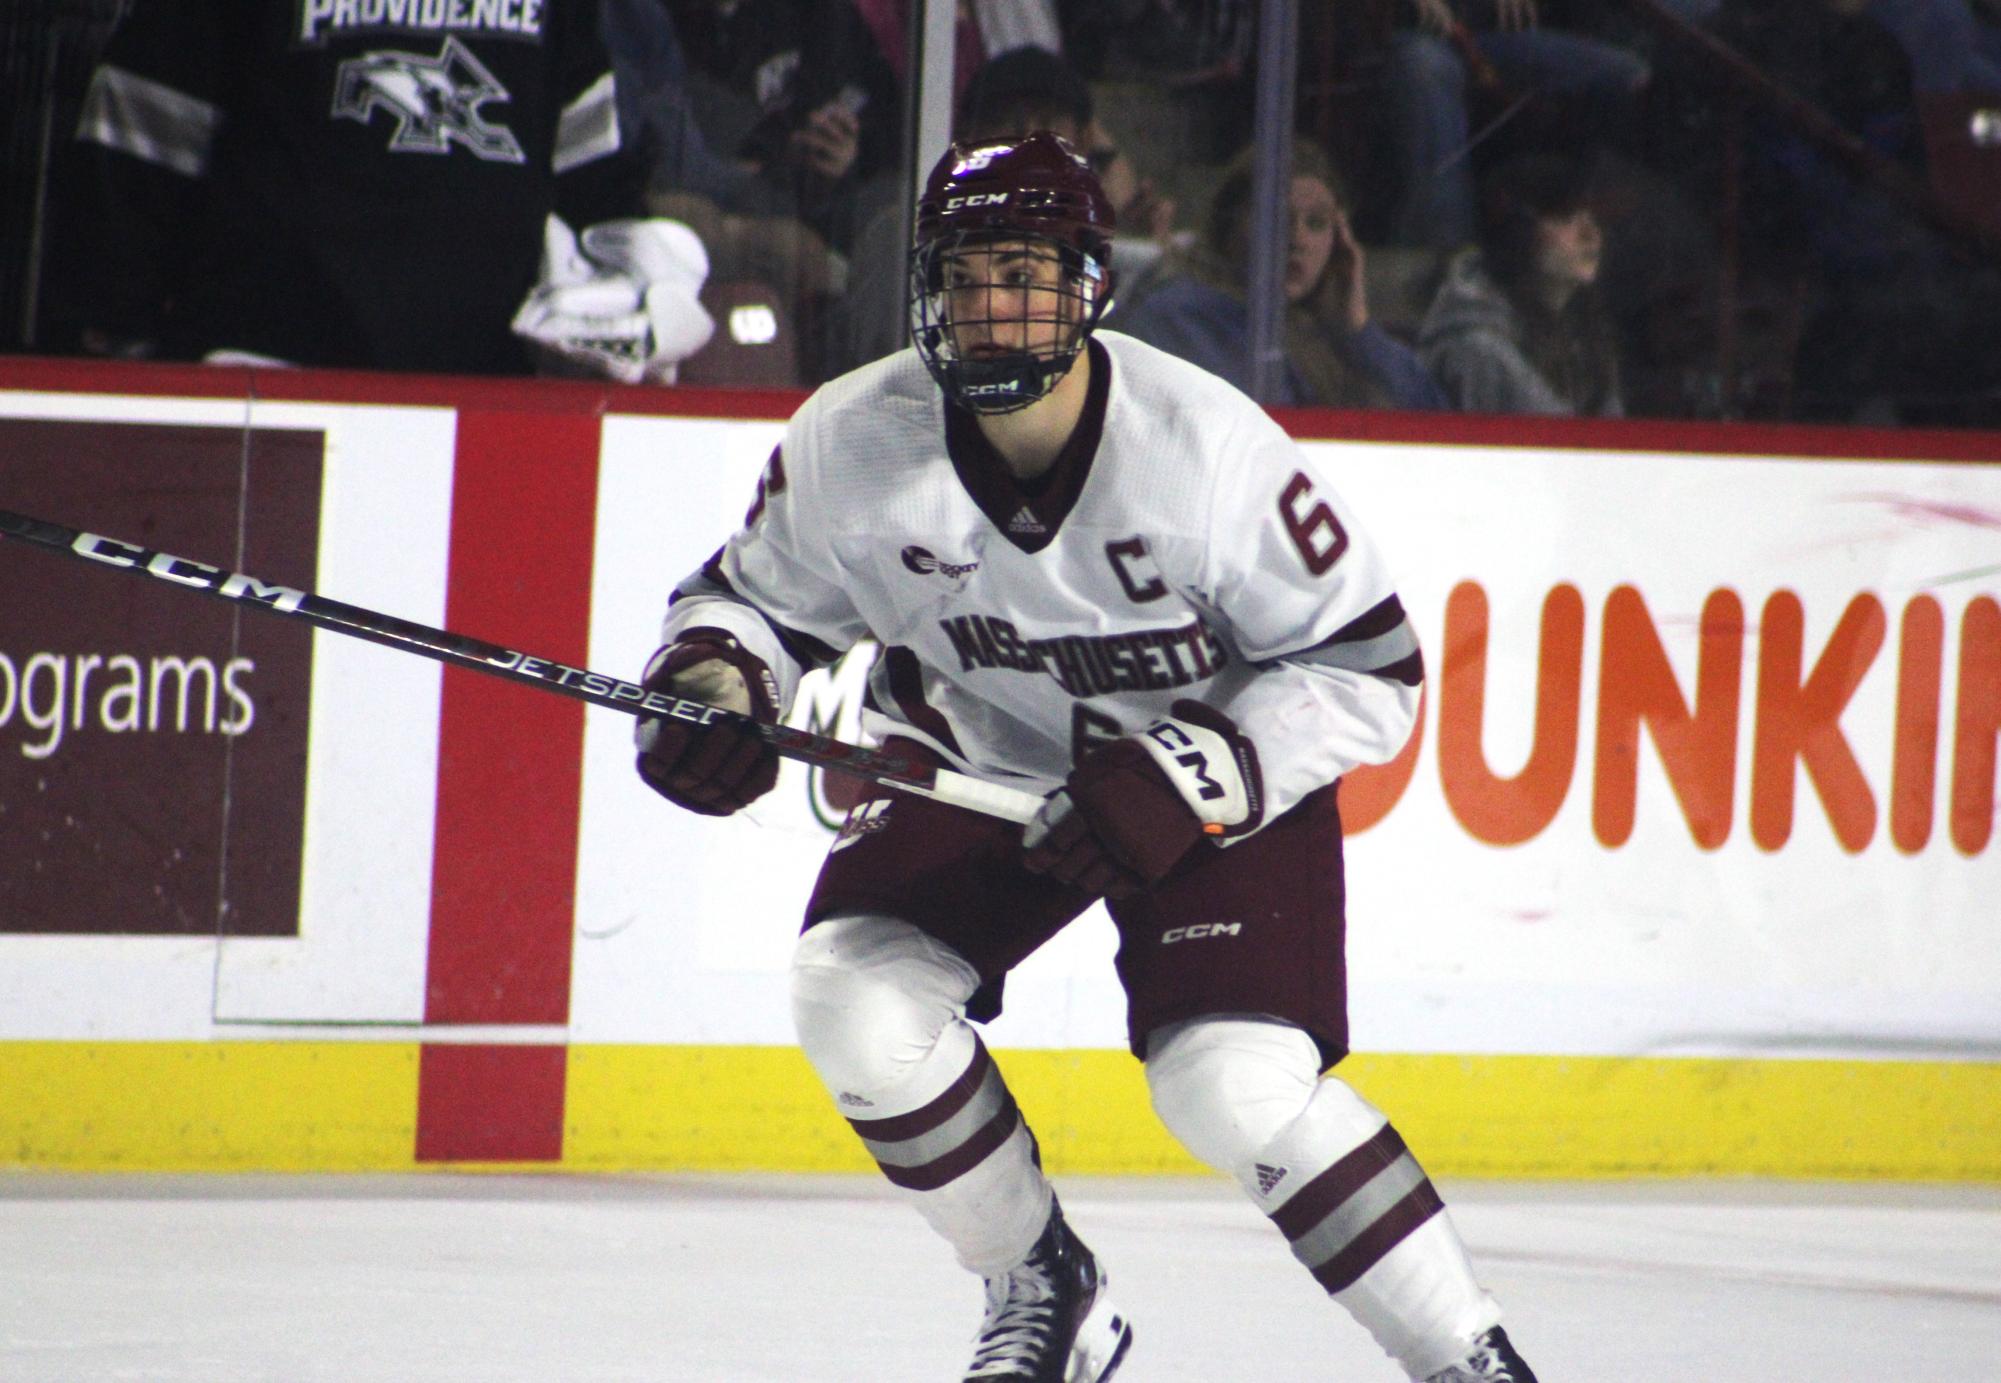 UMass picks up five points in weekend series with Providence